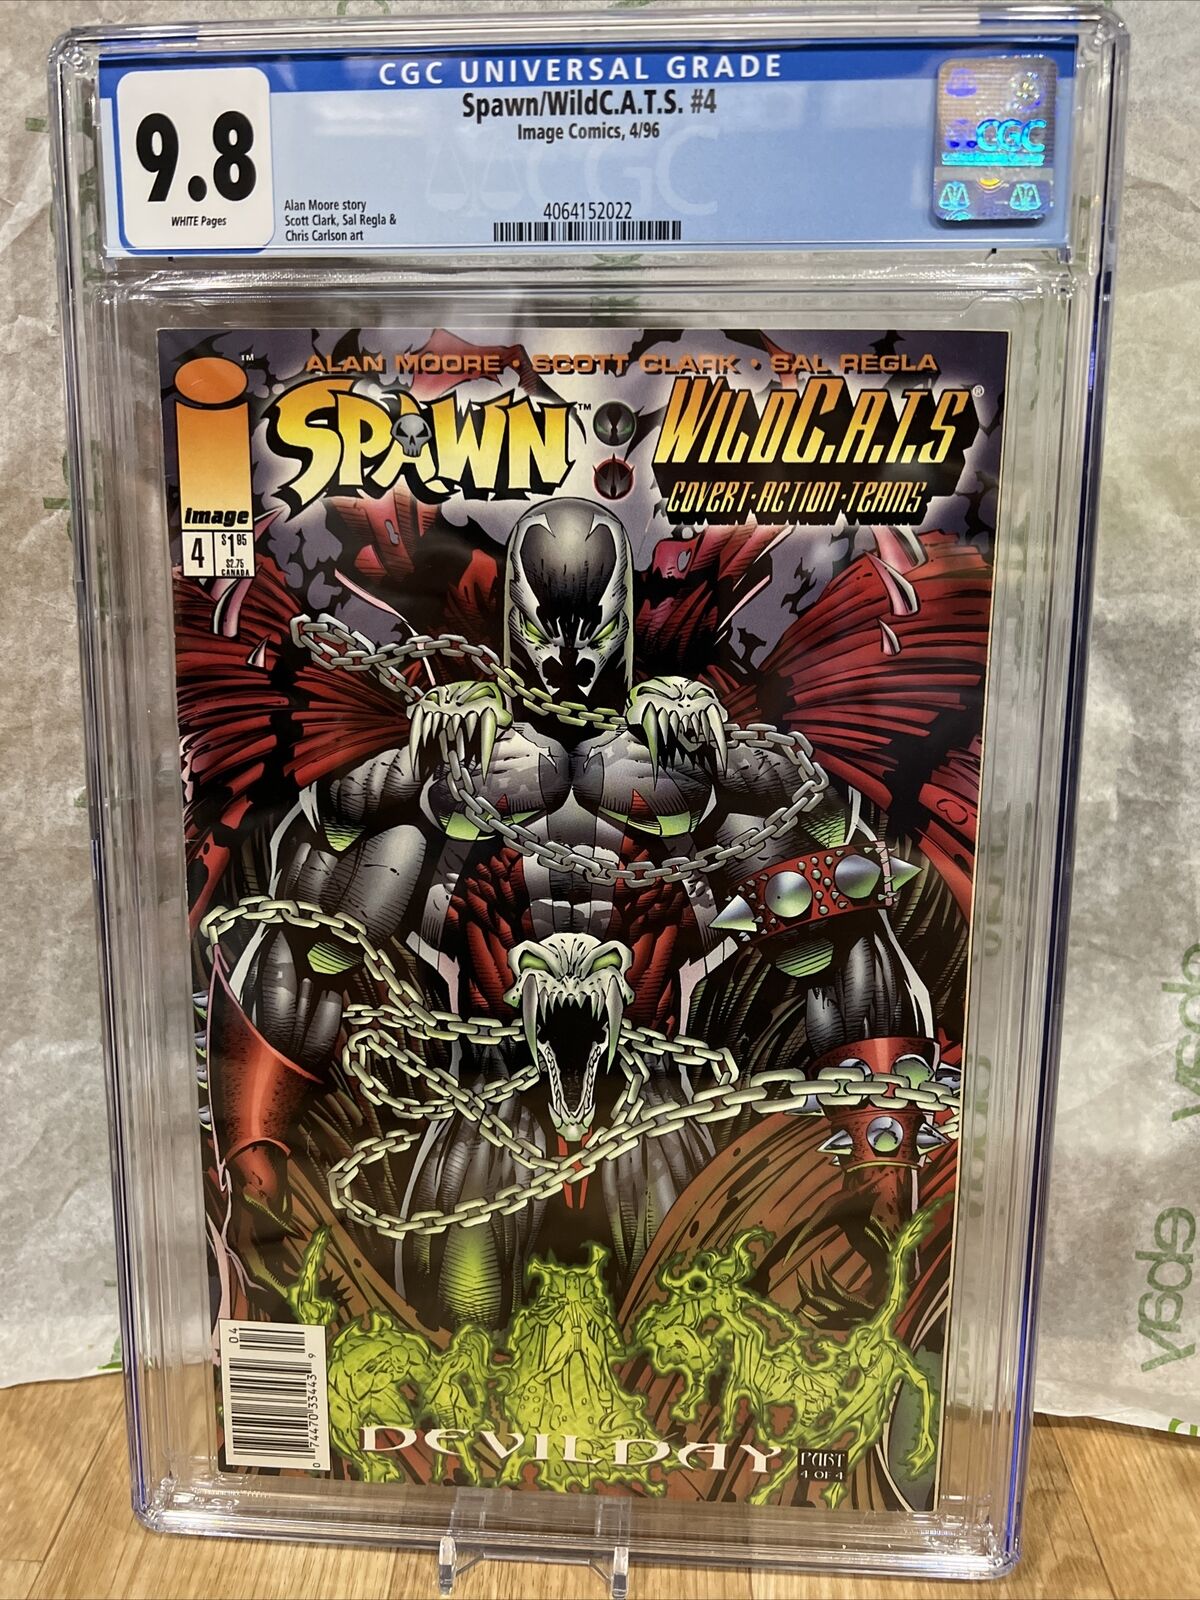 SPAWN/WILDC.A.T.S 4 CGC 9.8- DEVIL DAY PART 24 Low Pop Of 1 ? Newsstand Edition